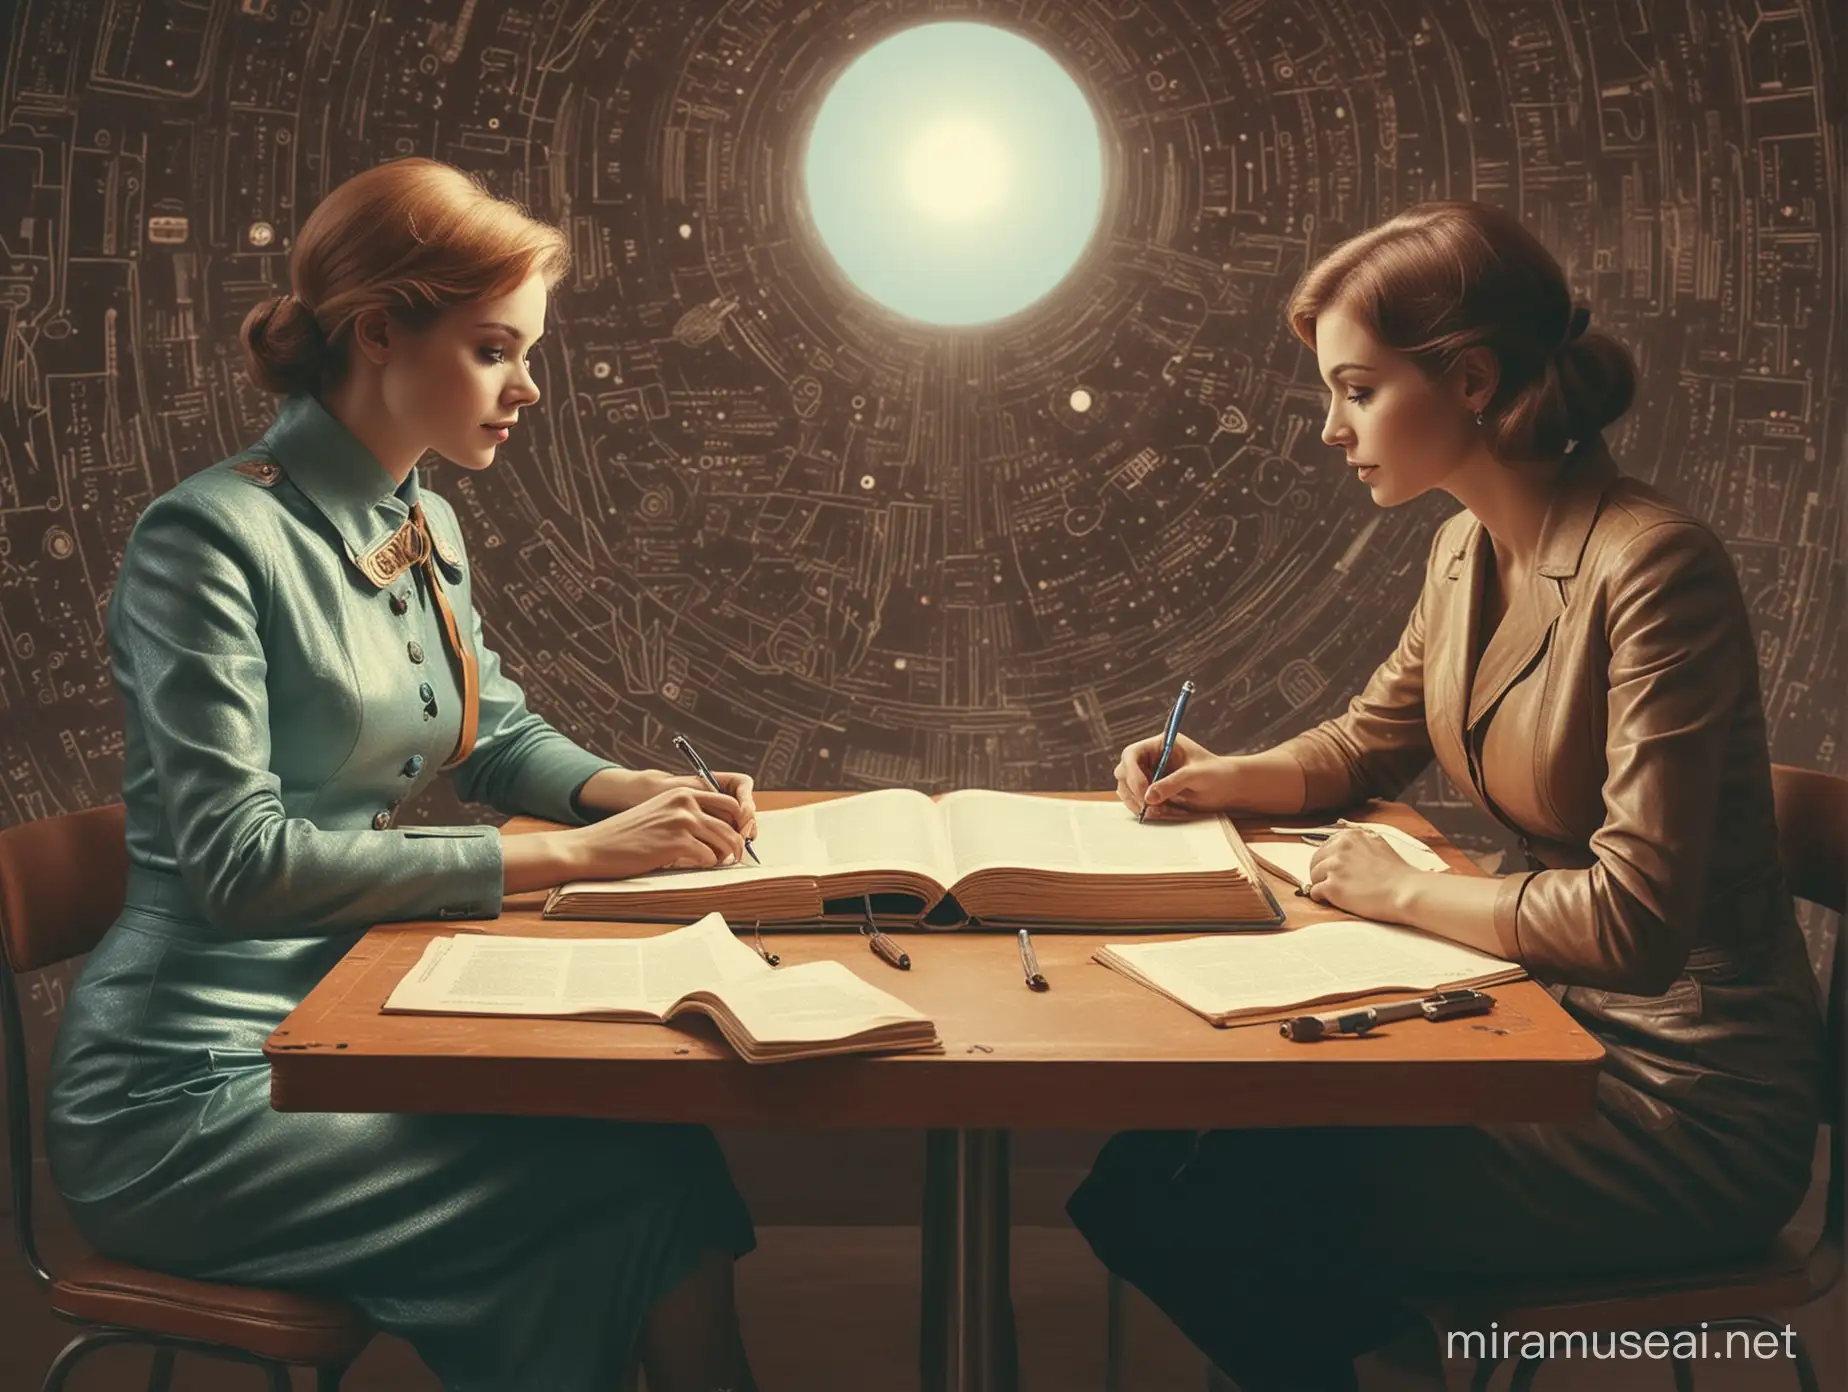 In the style of 1960s retrofuturism, have two people, one woman and one man, sitting at table and writing something to a thick old book.